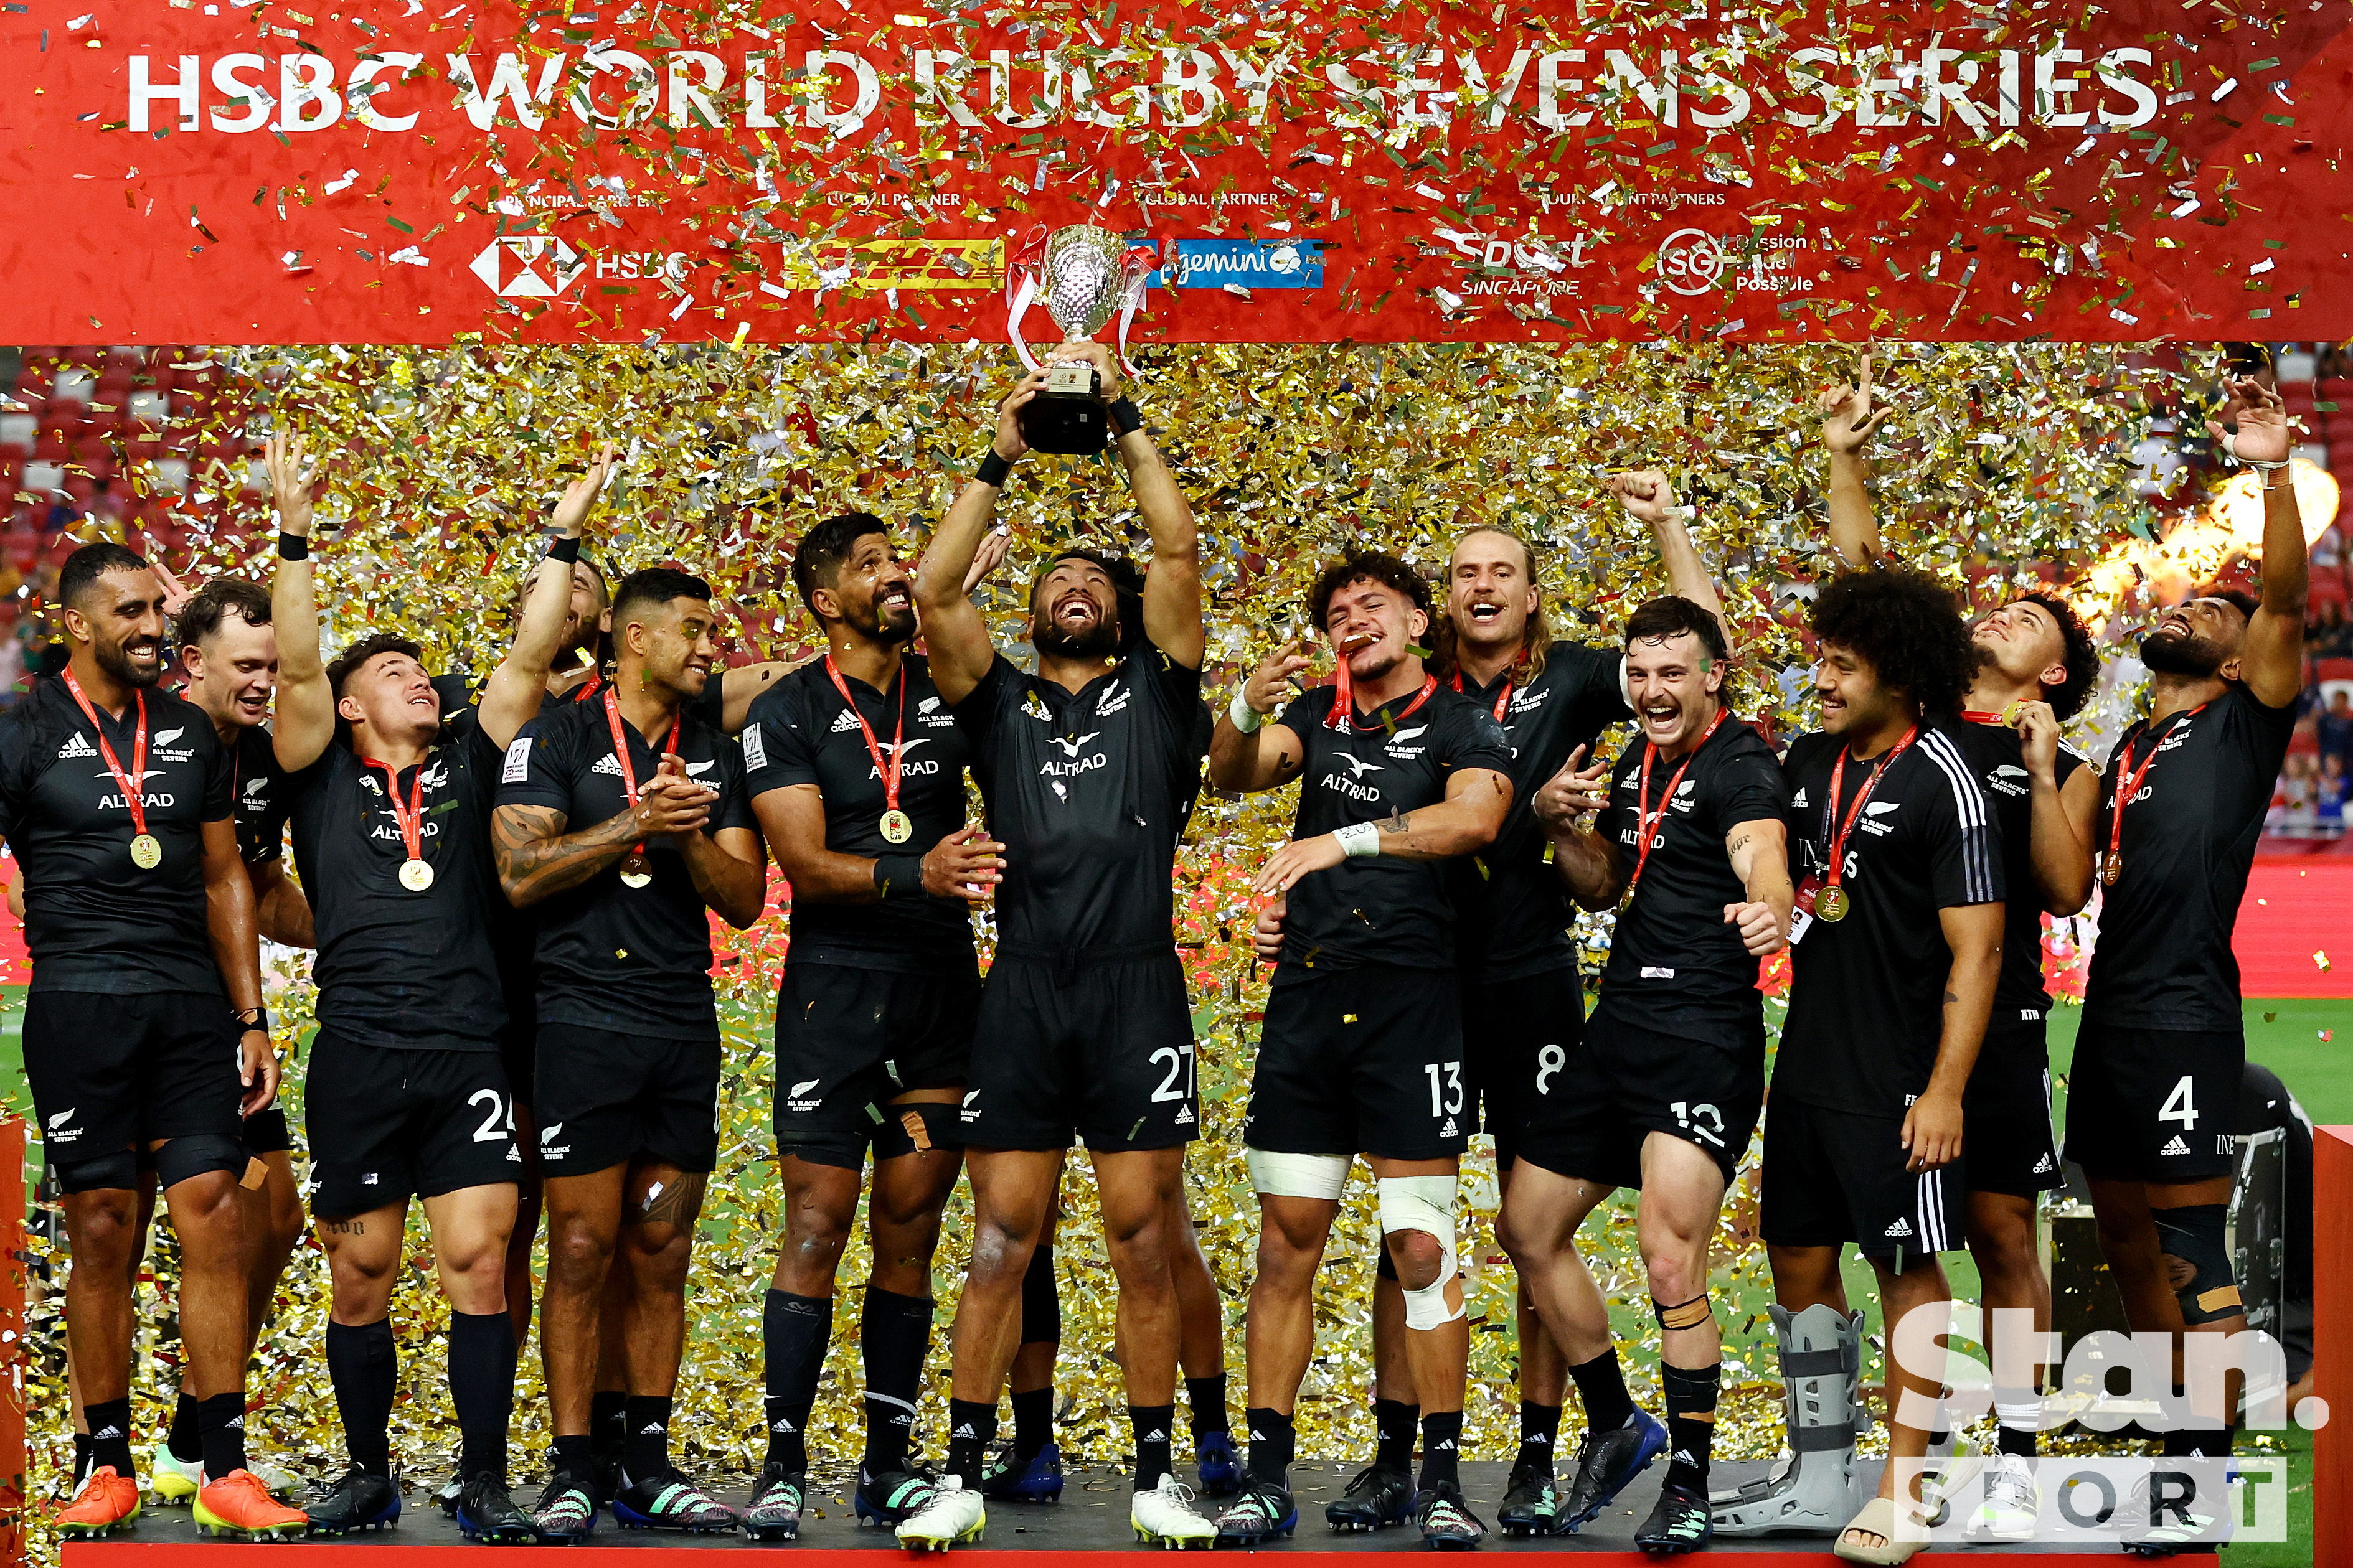 New Zealand celebrate as 2022/23 World Rugby Sevens Series Champions